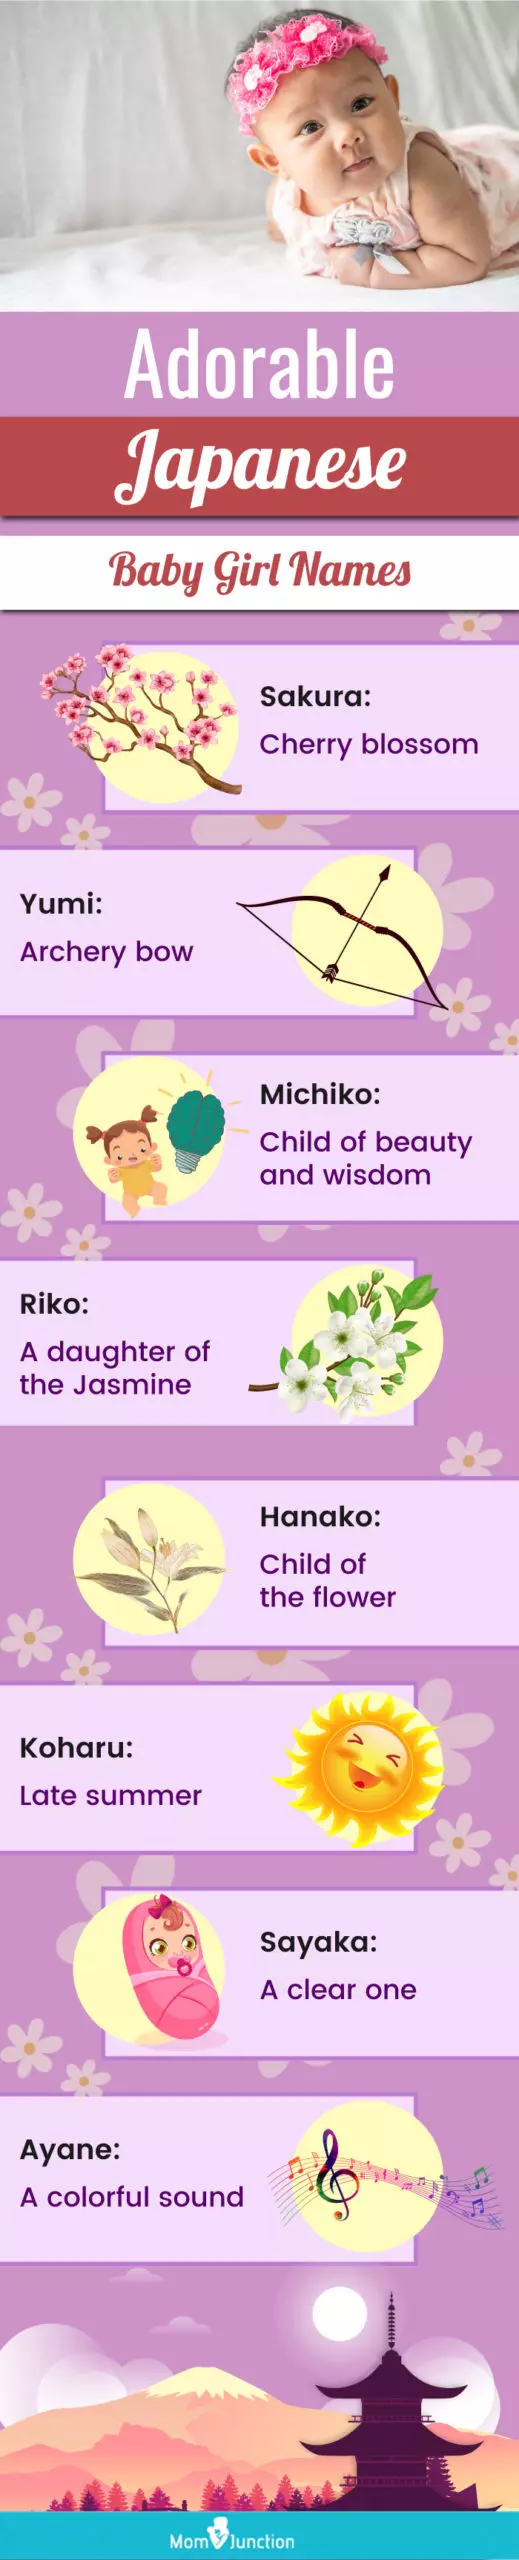 adorable japanese baby girl names(infographic)